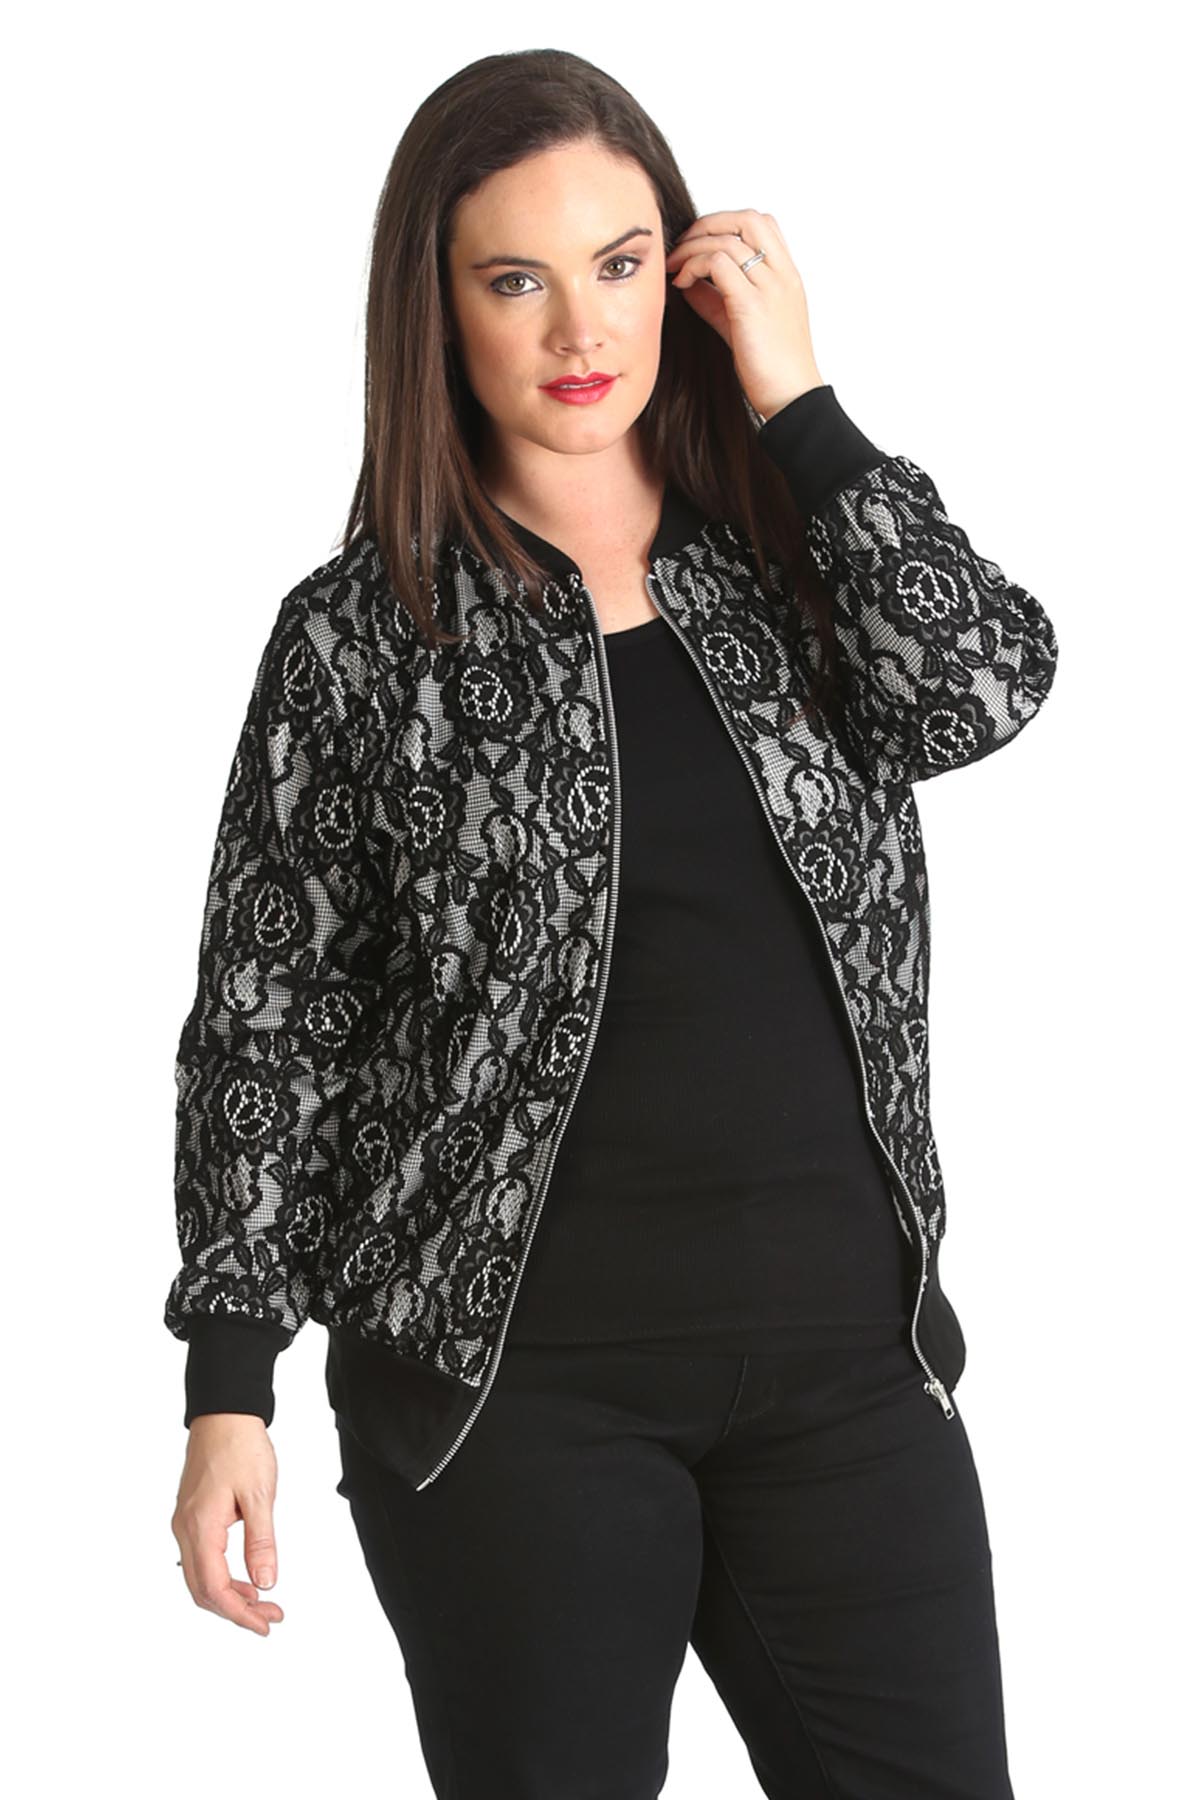 New Ladies Bomber Jacket Womens Floral Lace Ribbed Style Plus Size ...